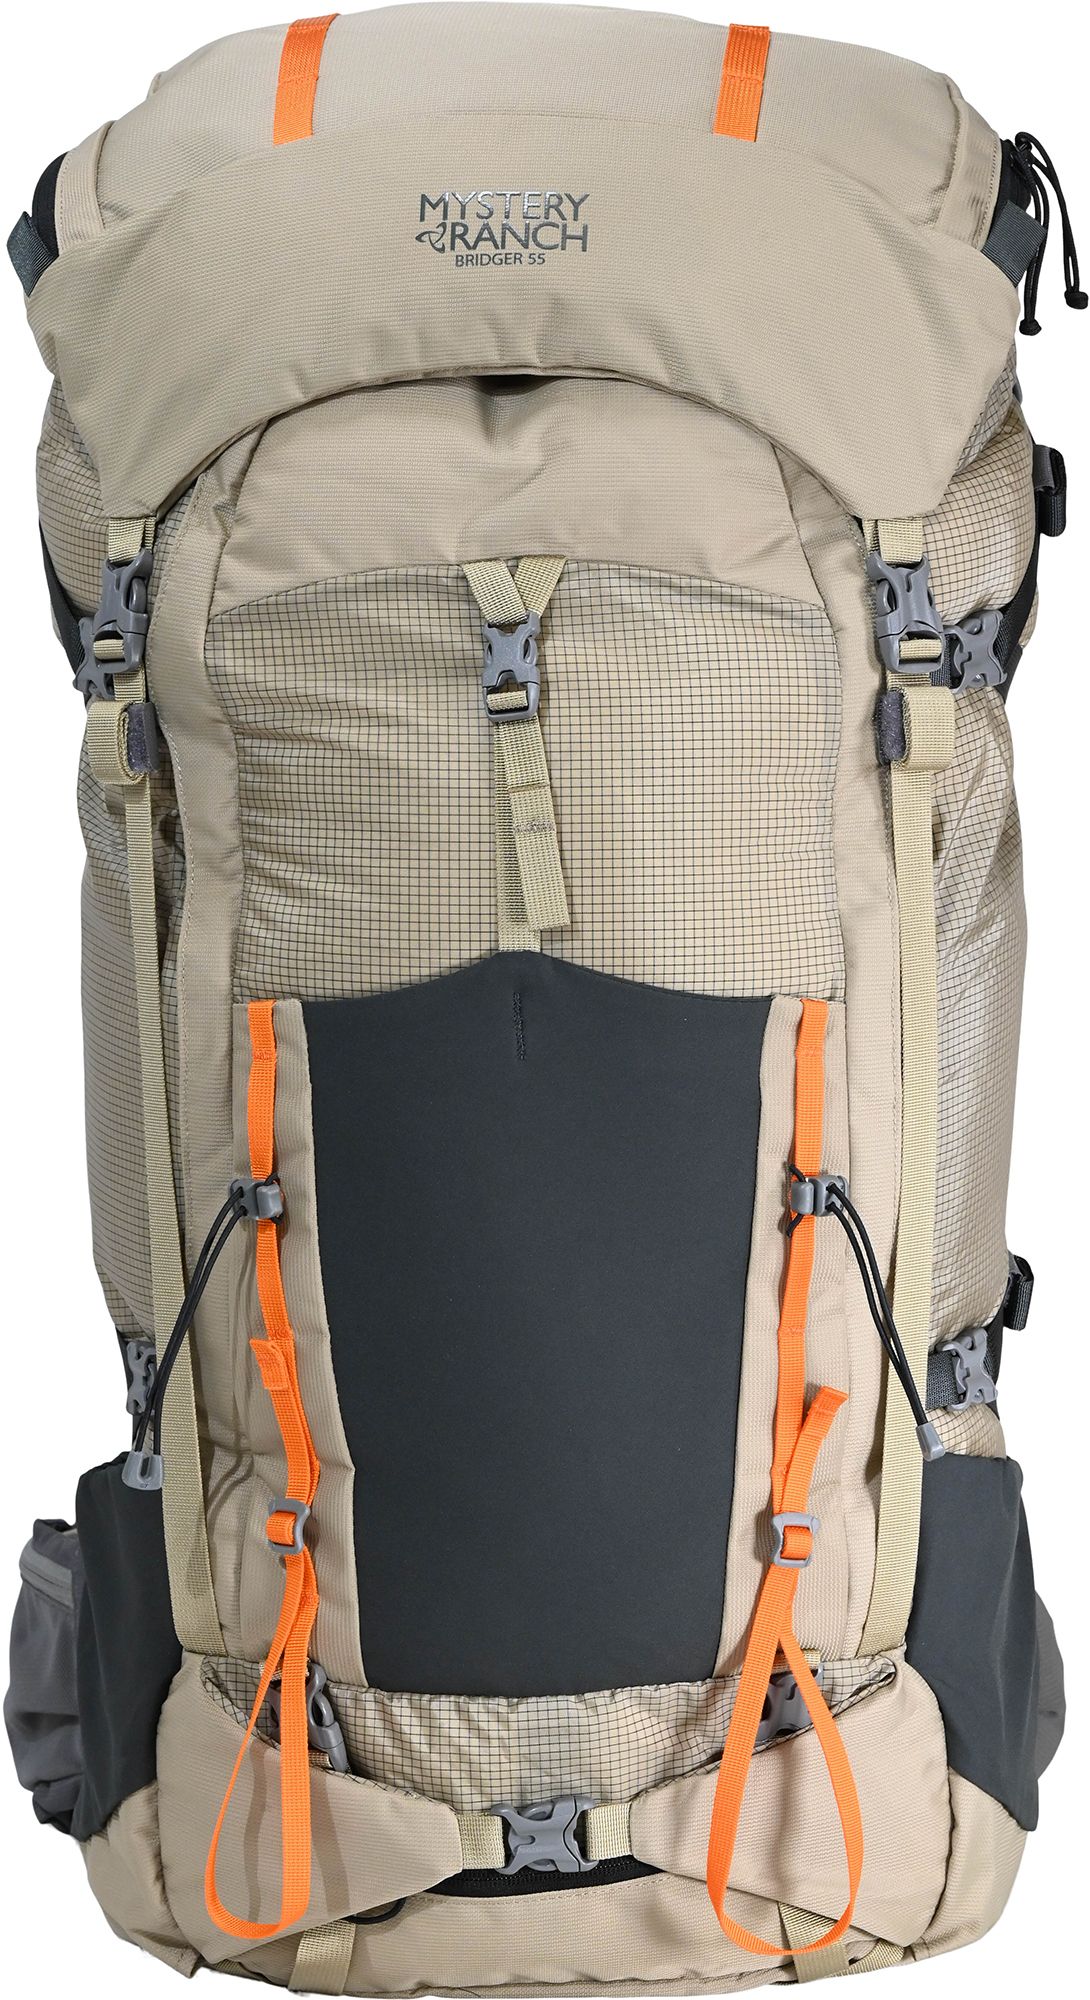 Photos - Knife / Multitool Mystery Ranch Backpack Bridger 55L Frame Pack, Men's, Small, Hummus 21ZZFM 